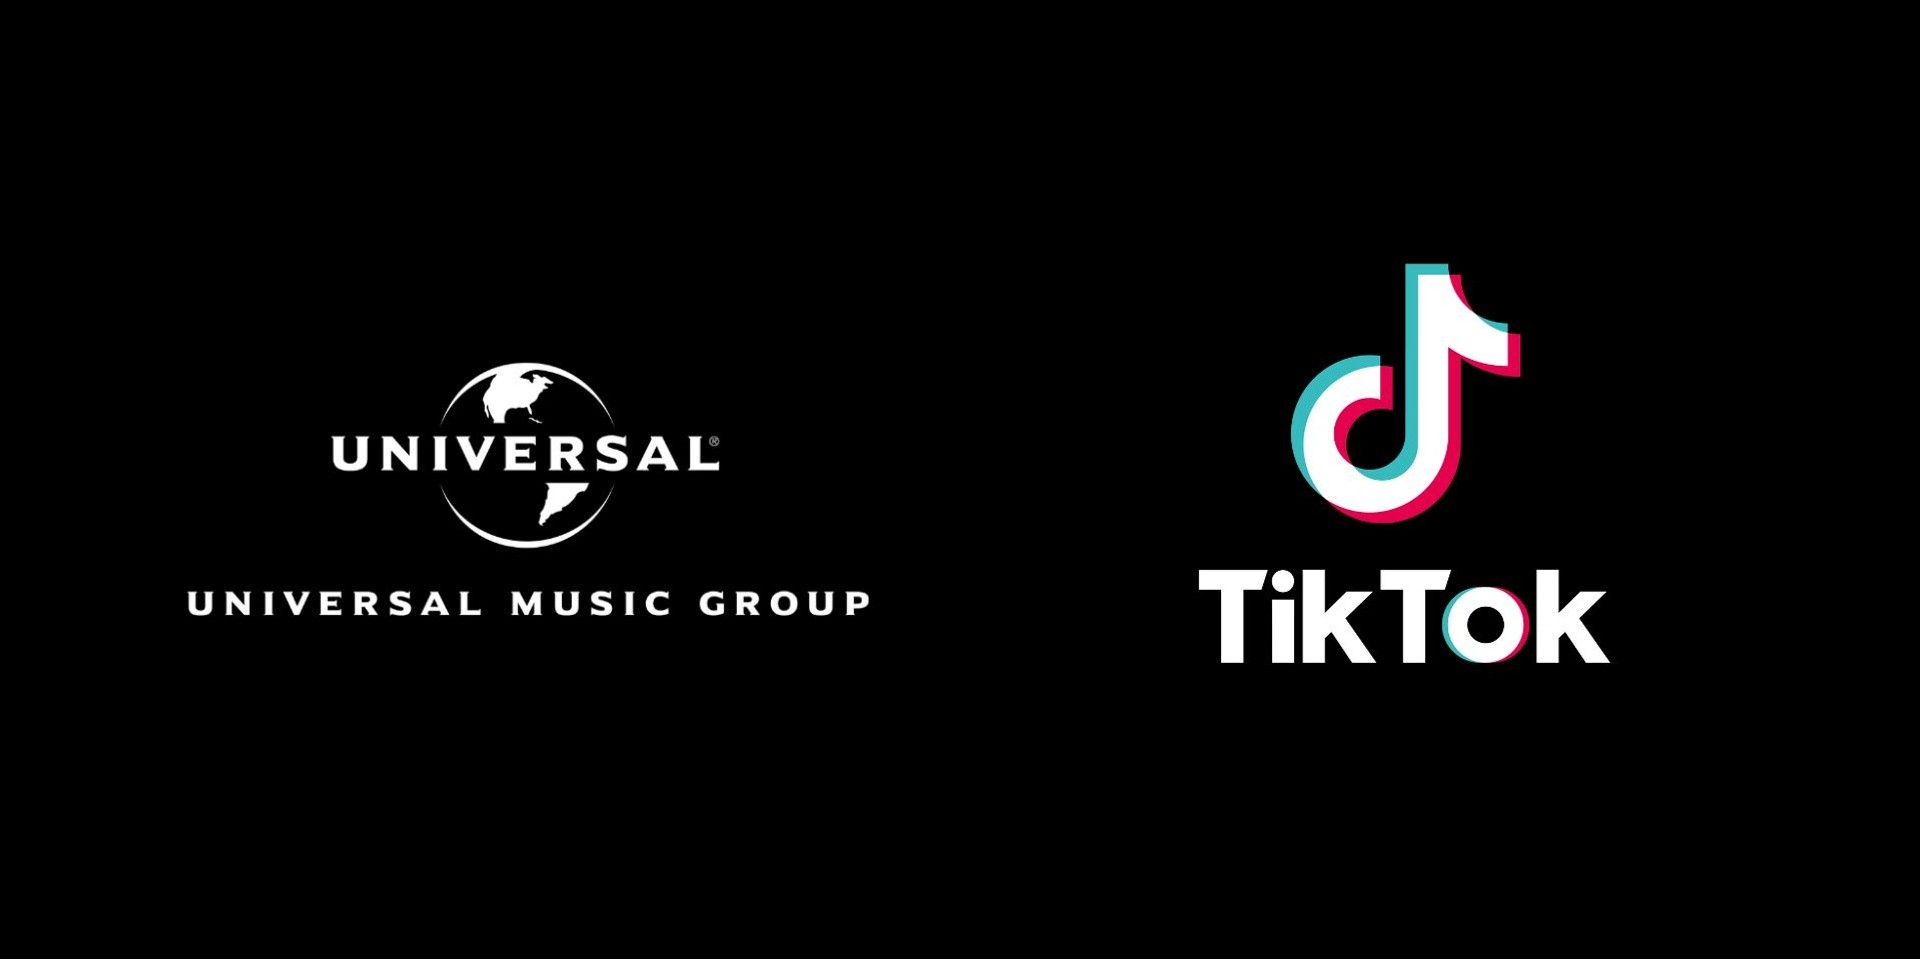 Universal Music Group catalogue will no longer be available on TikTok and TikTok Music after contract negotiations fail: "We will always fight for our artists and songwriters."